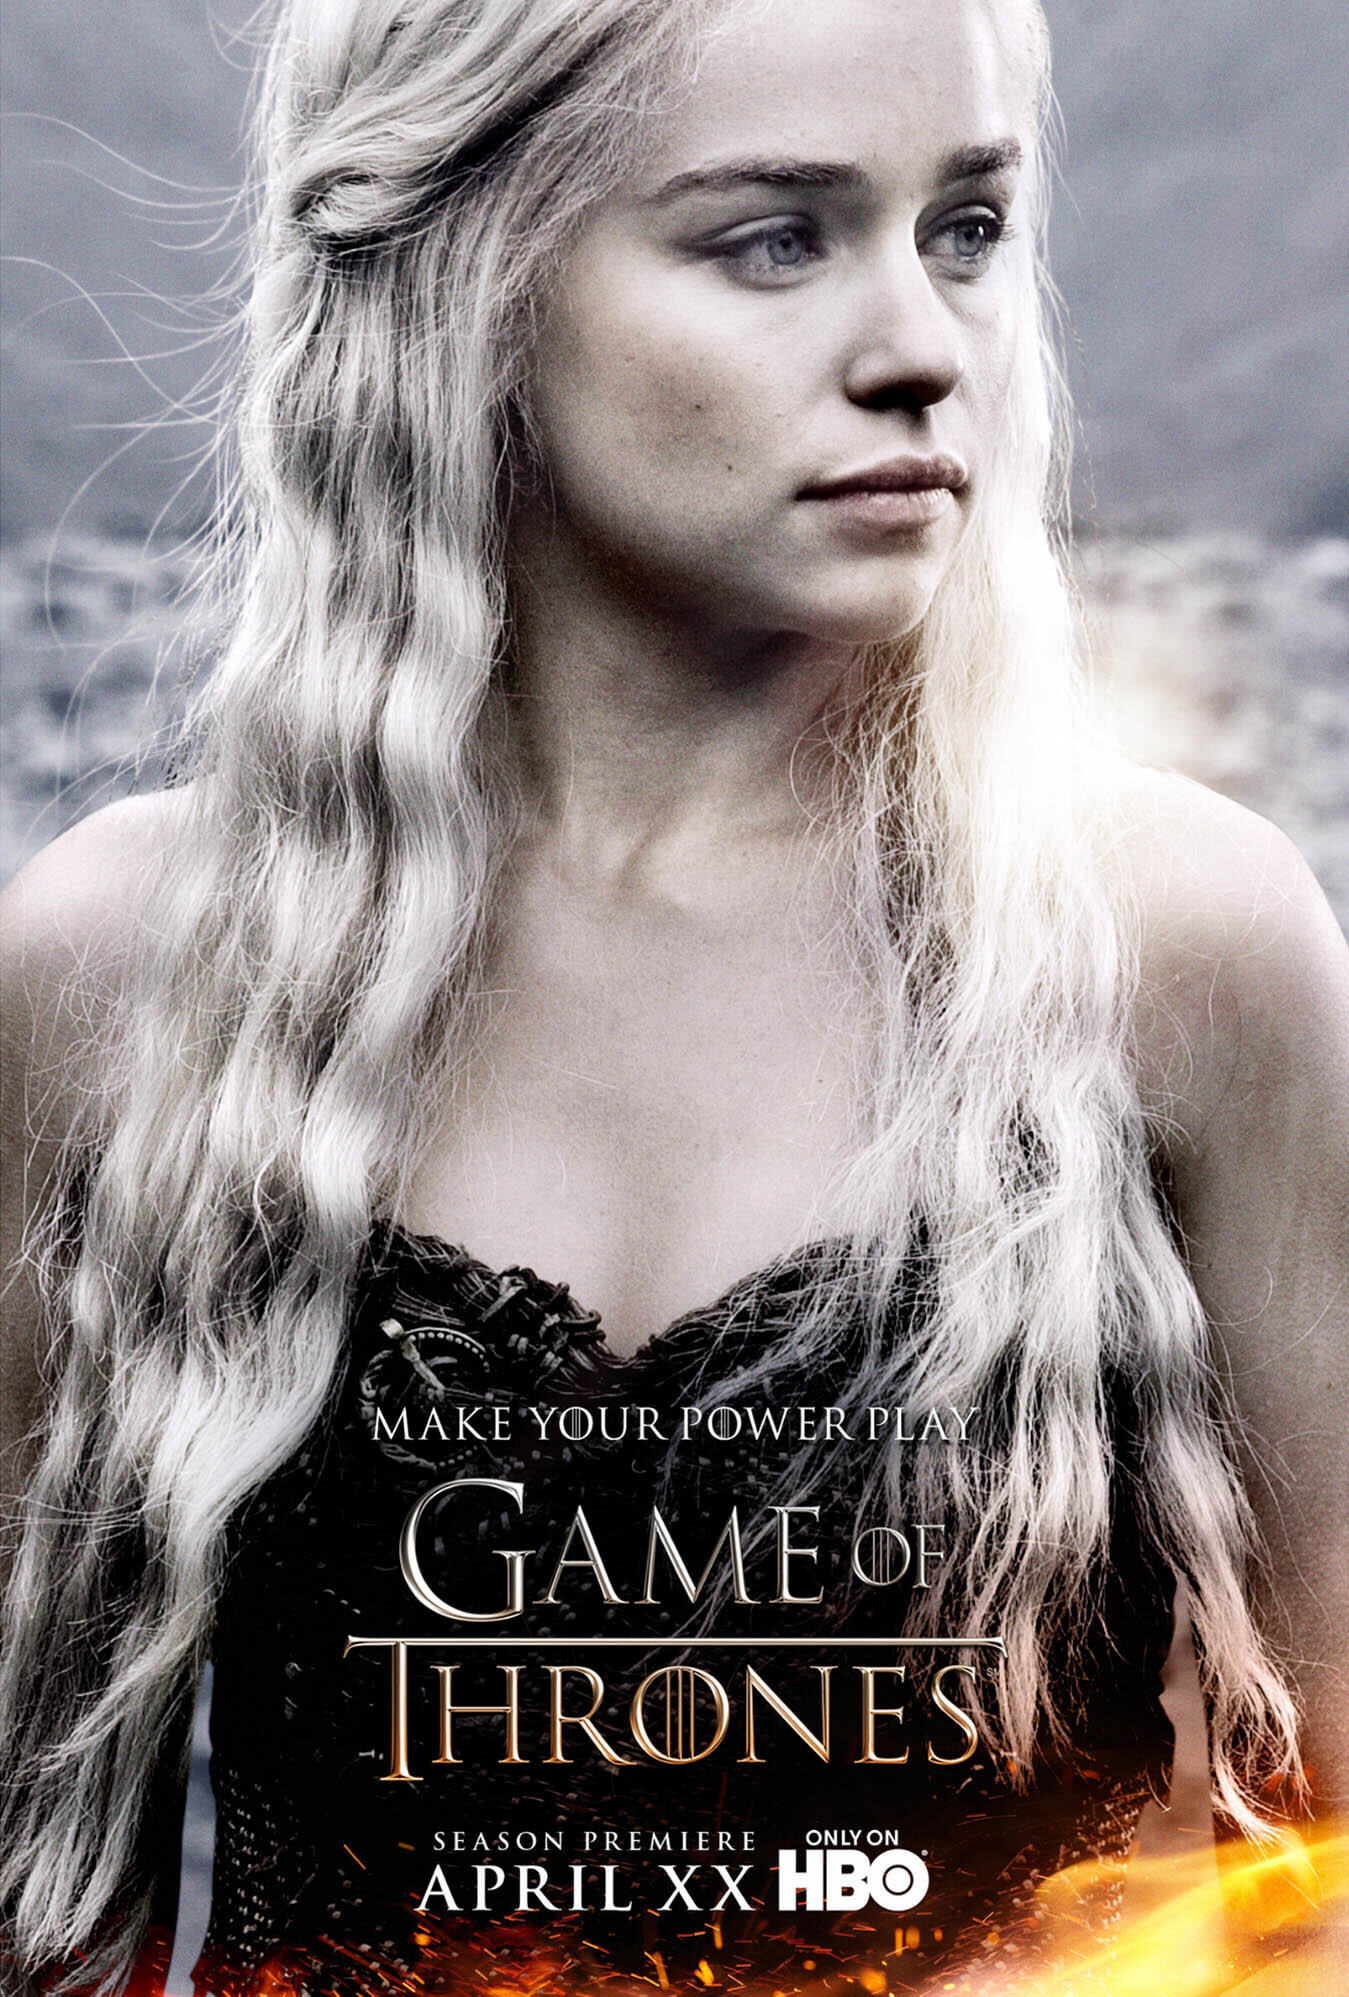 IGNITE_YOUR_SOUL_BRAND_GAME_OF_THRONES